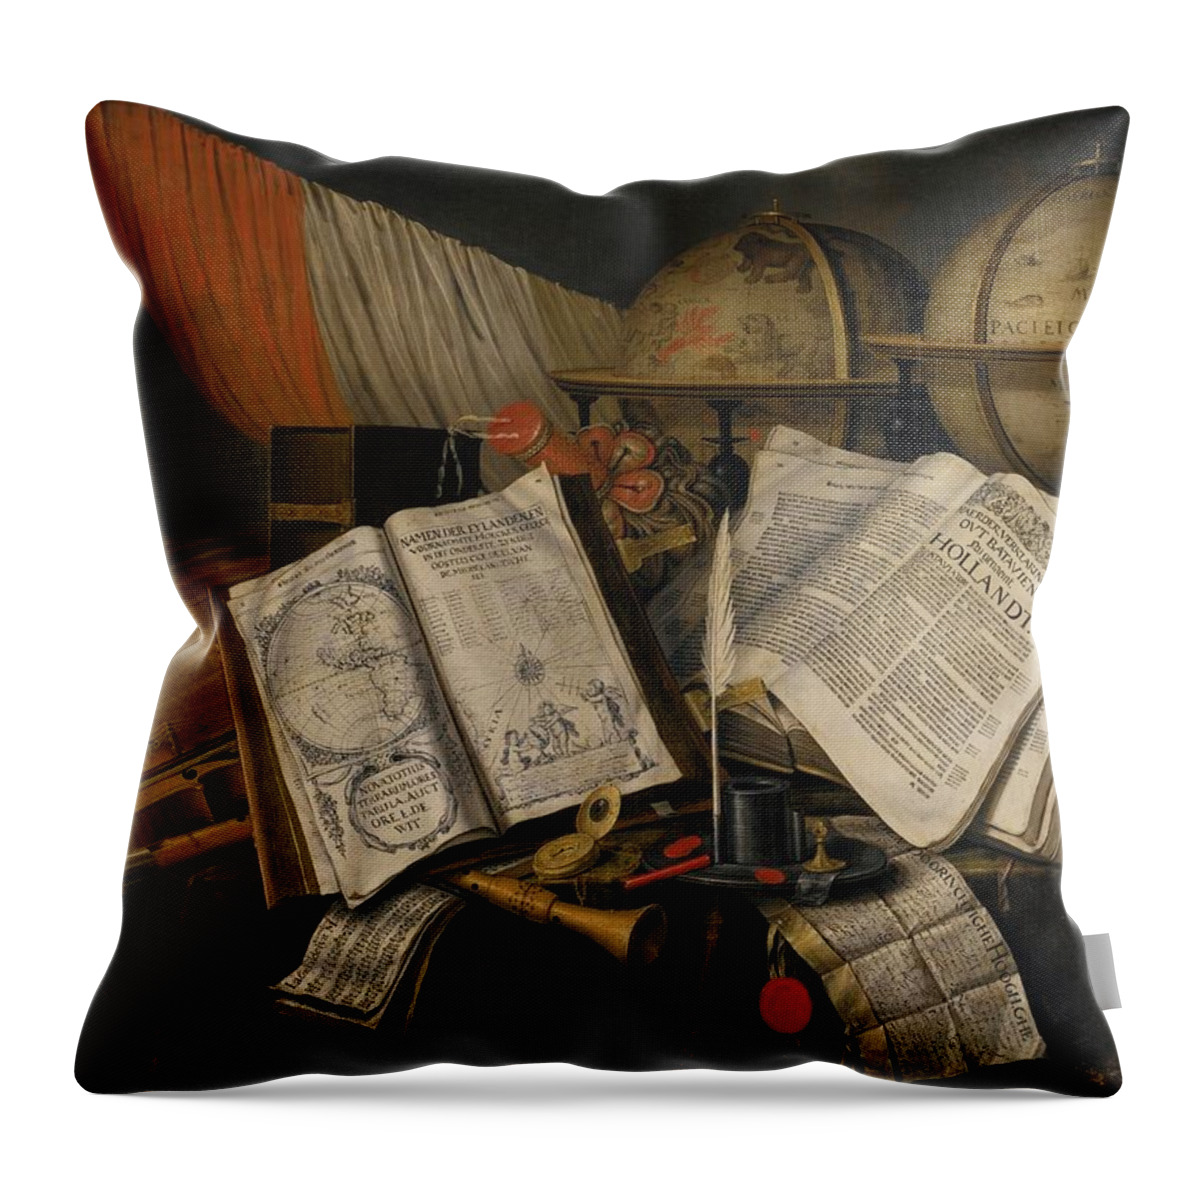 Edwaert Collier Breda 1642 - 1708 London Throw Pillow featuring the painting Still Life With A Candlestick by Edwaert Collier